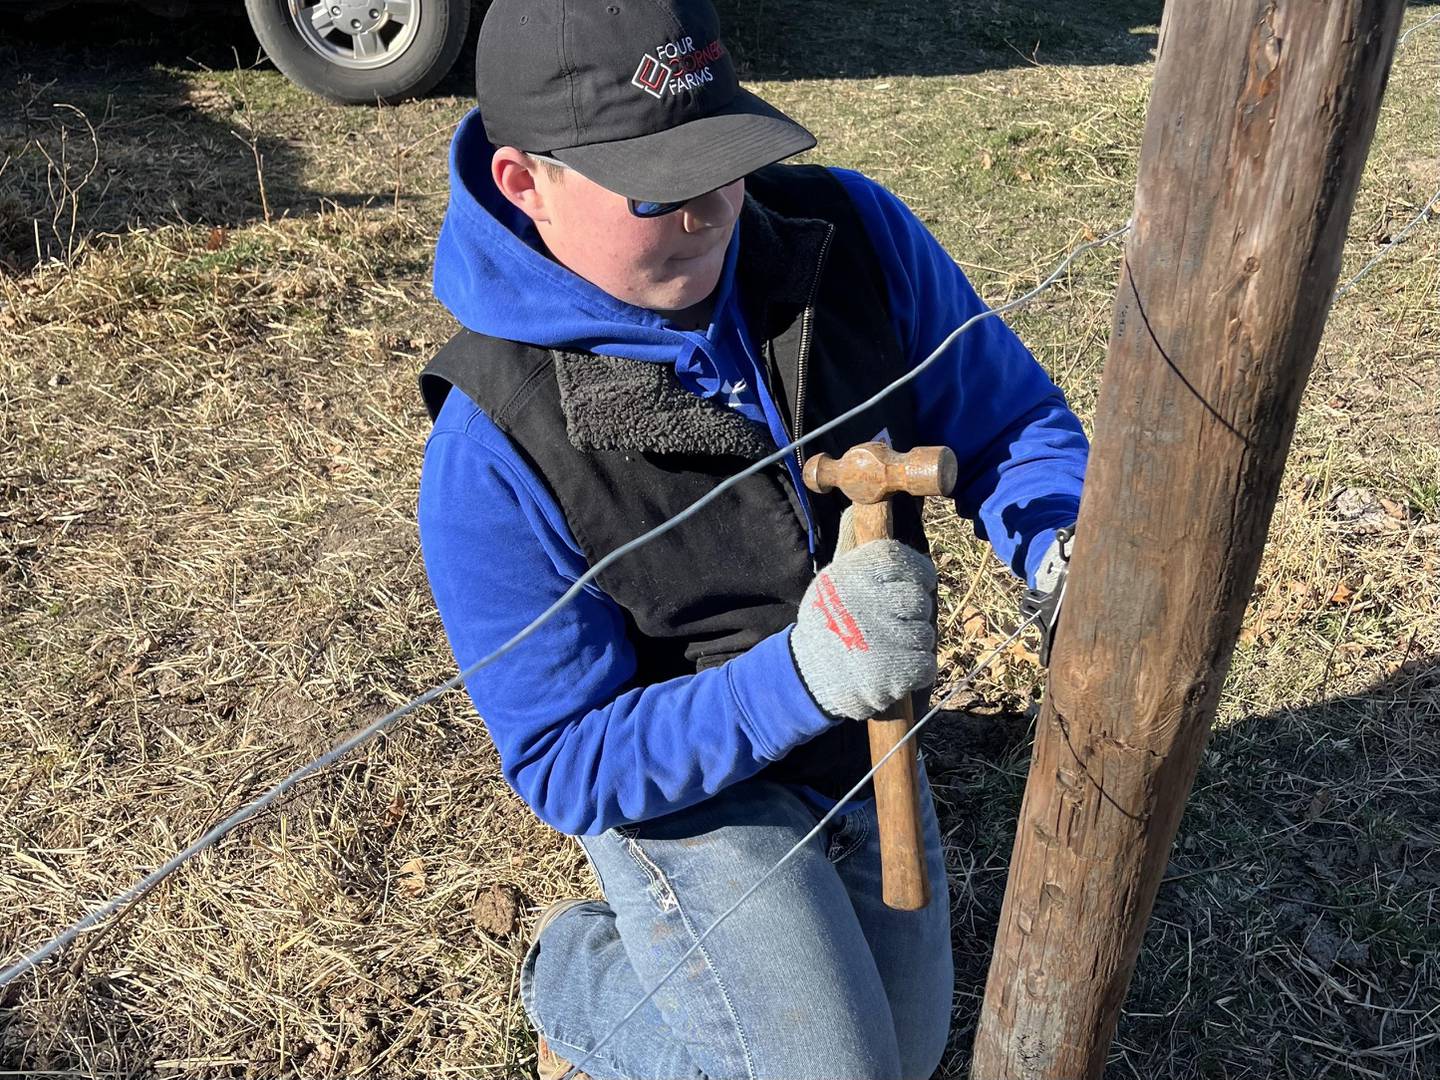 Waylon Paulek repairs a fence while working at one of three different farms. He processes calves during the calving season and prepares cattle for the showring.